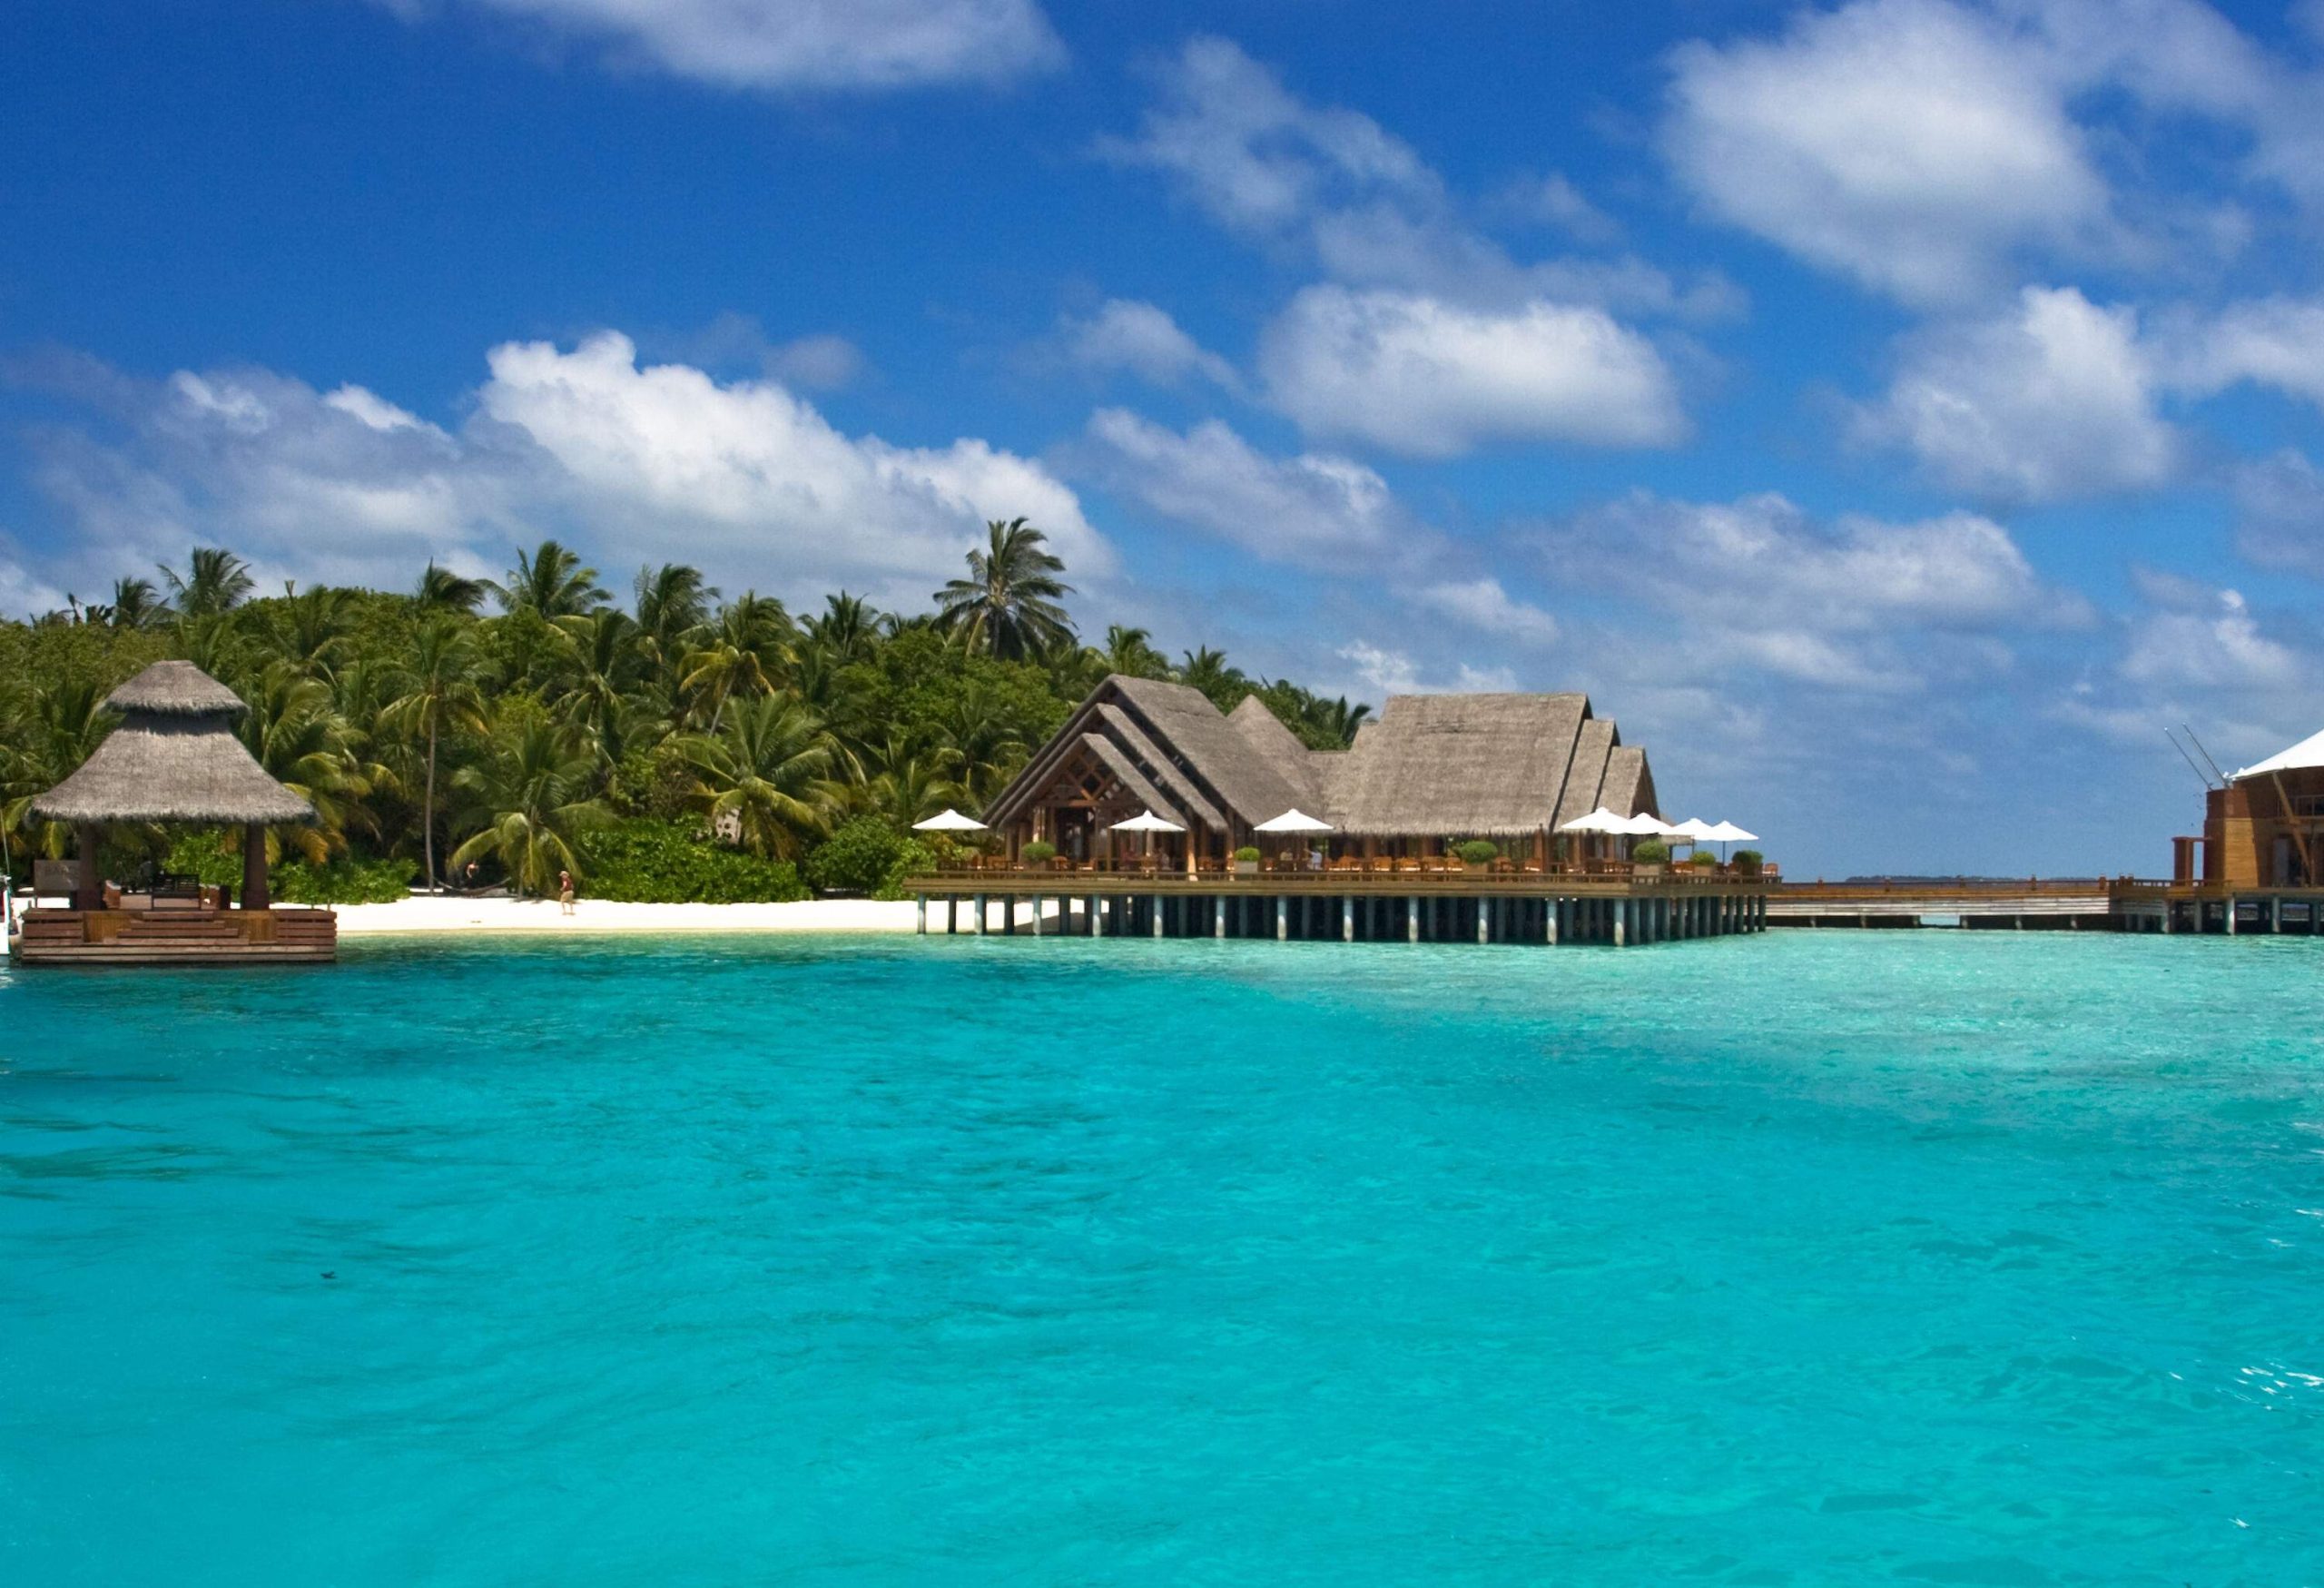 Overwater bungalows built on tropical seas close to the shore.